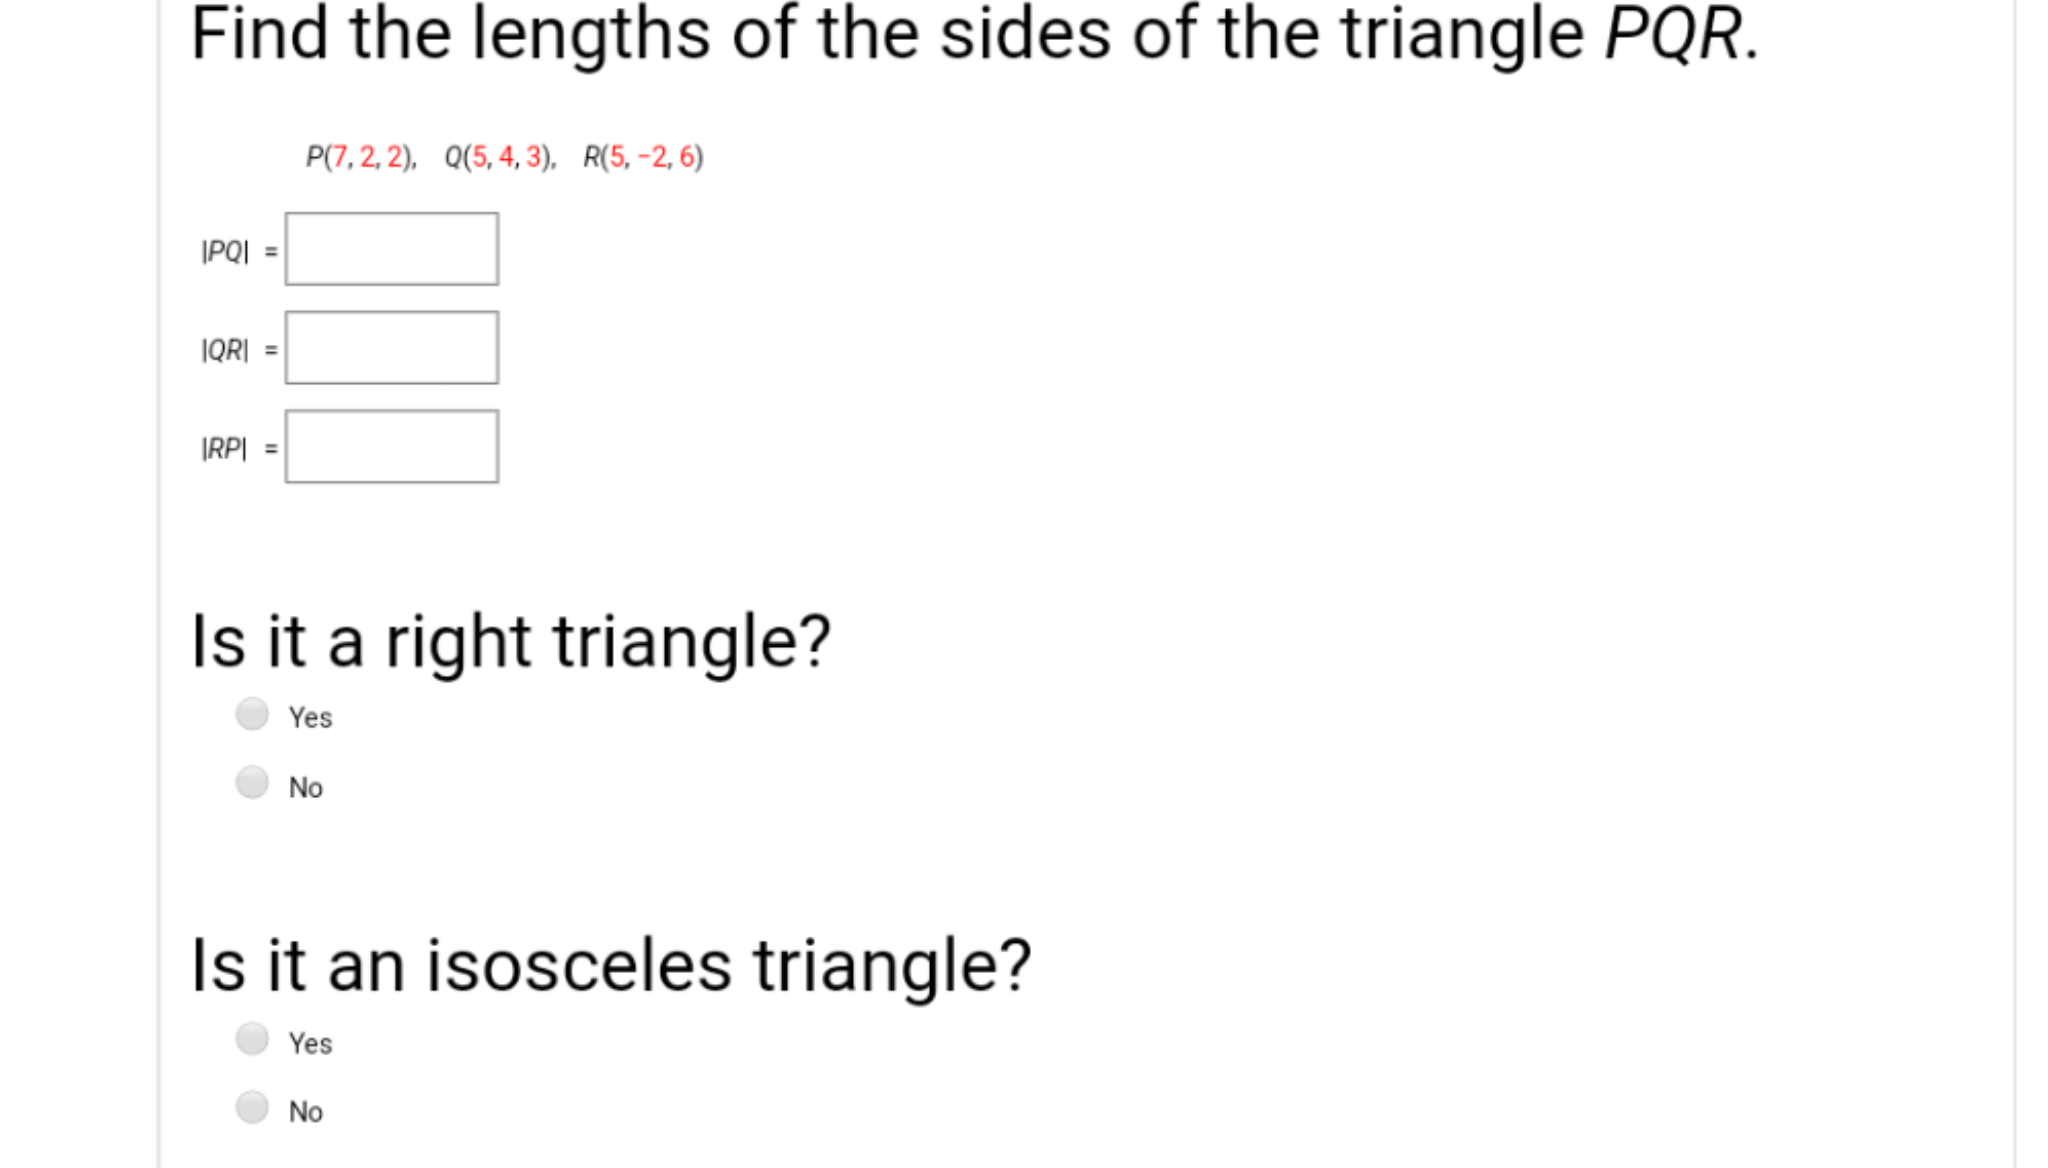 Find the lengths of the sides of the triangle PQR.
P(7, 2, 2), Q(5, 4, 3), R(5,-2, 6)
|PQI
IQR|
|RP|
Is it a right triangle?
Yes
No
Is it an isosceles triangle?
Yes
No
